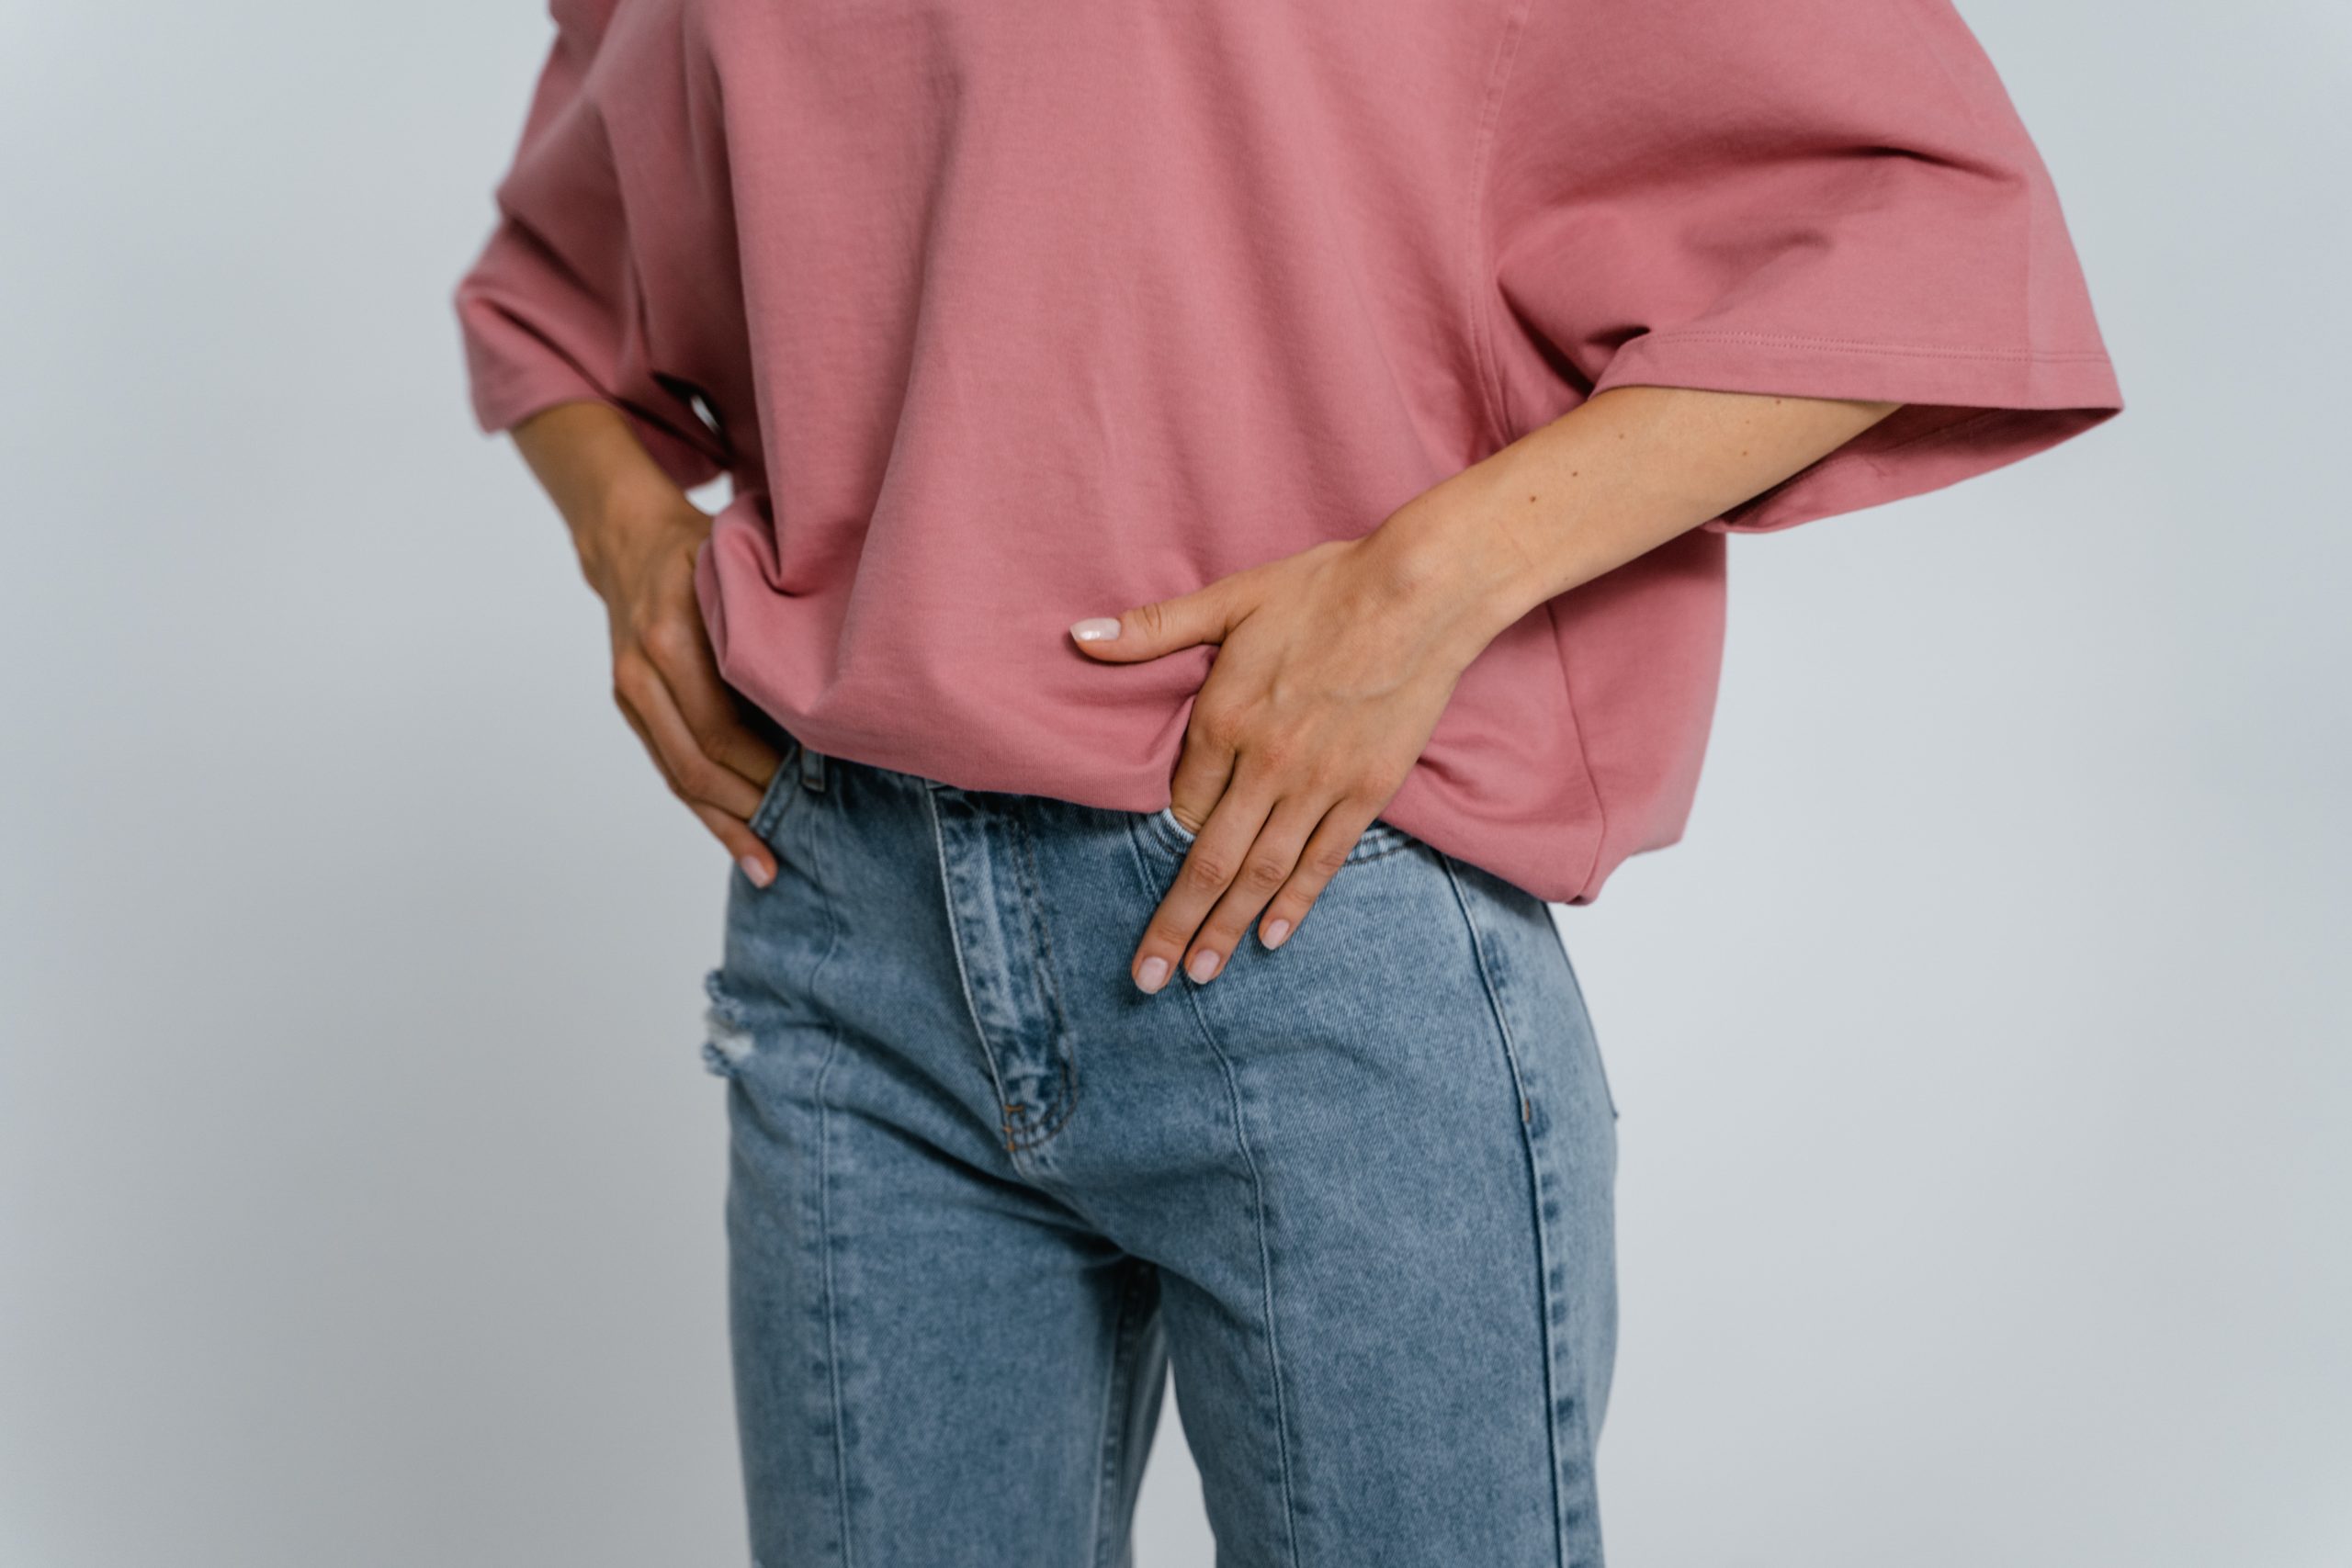 Picture of a women's hips and torso. She is wearing a pink shirt and lightly coloured jeans.